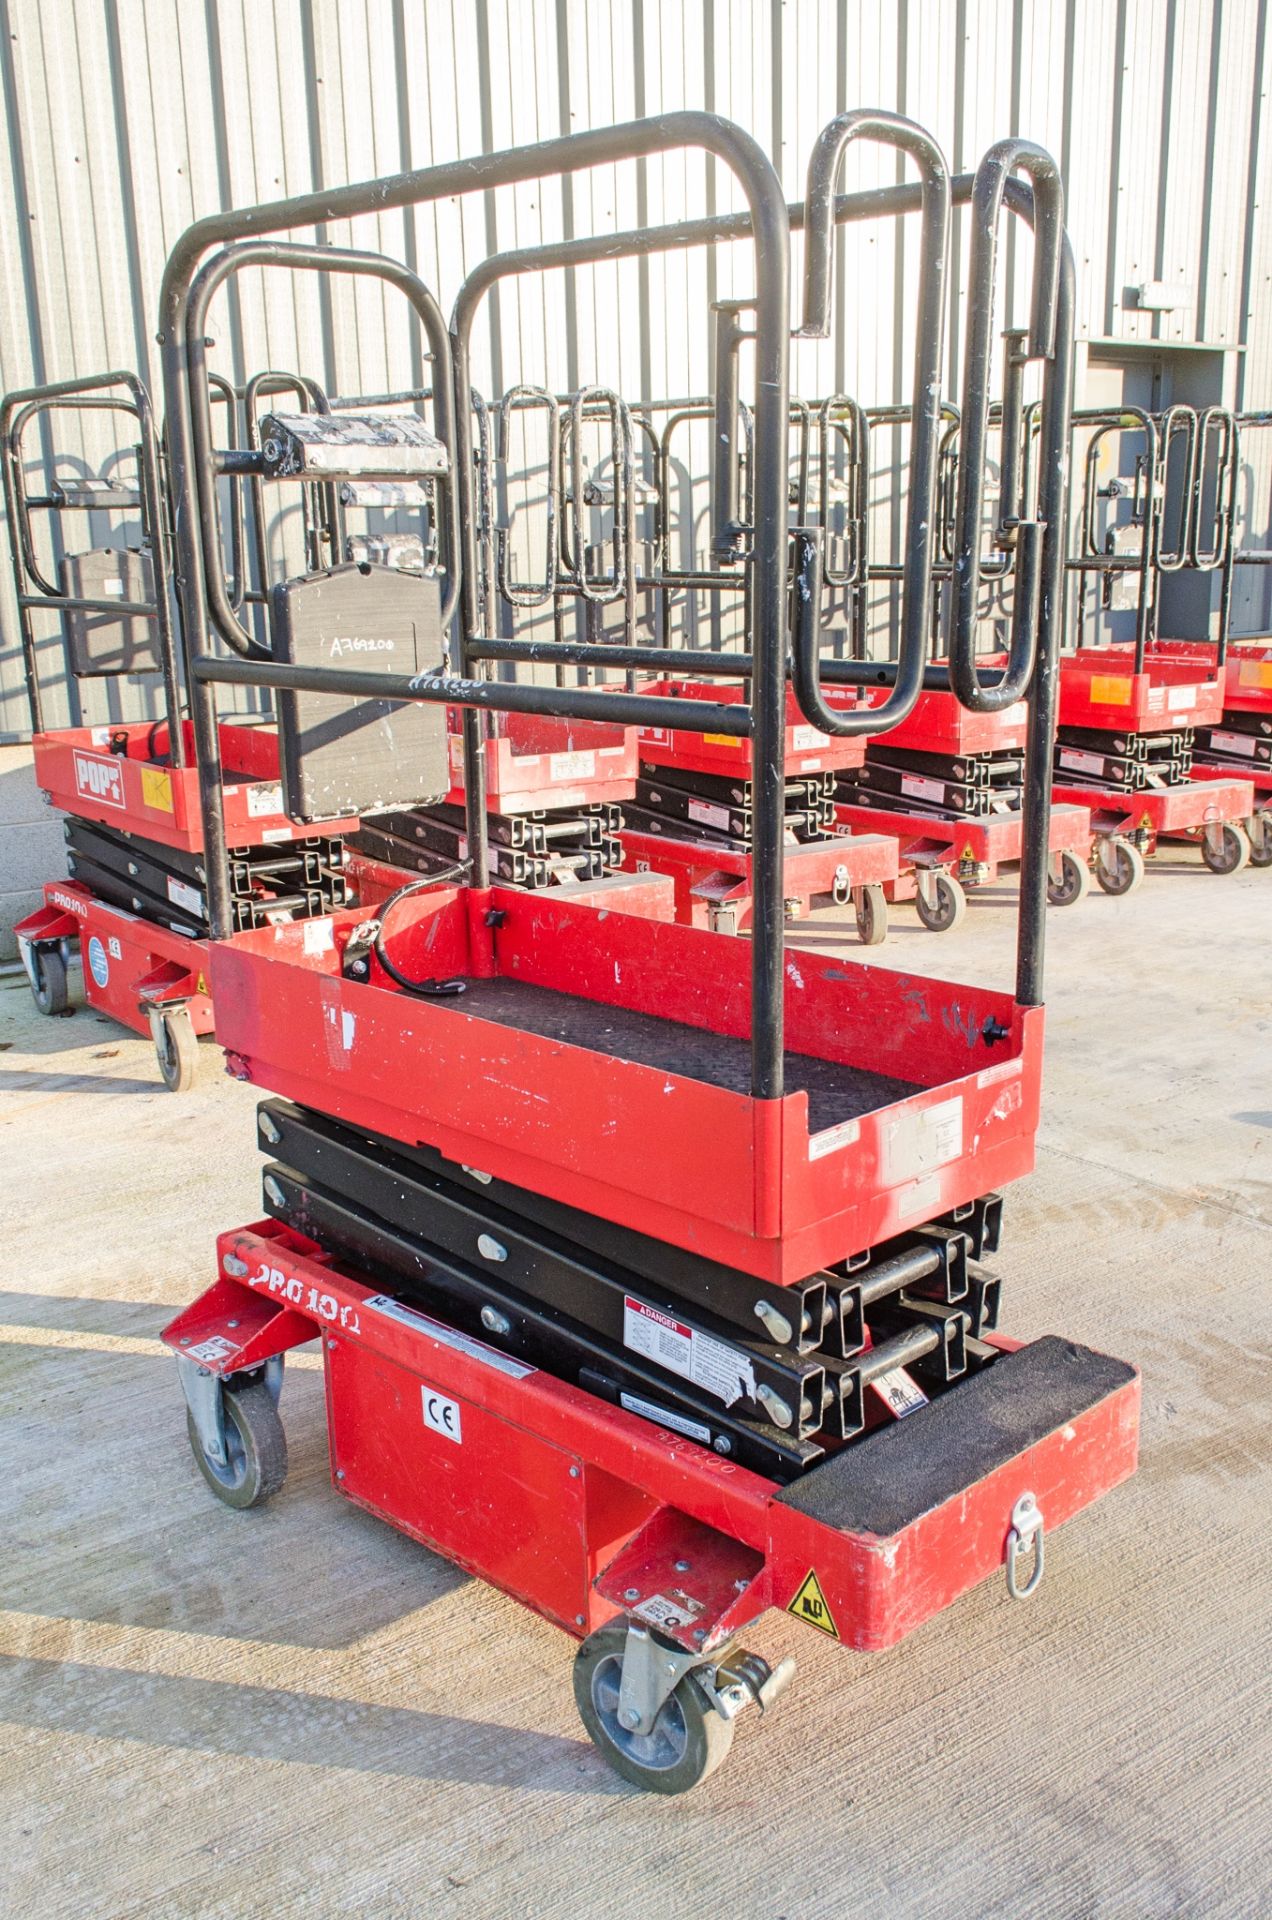 Pop Up Pro 10 battery electric push around scissor lift A769200 - Image 2 of 4